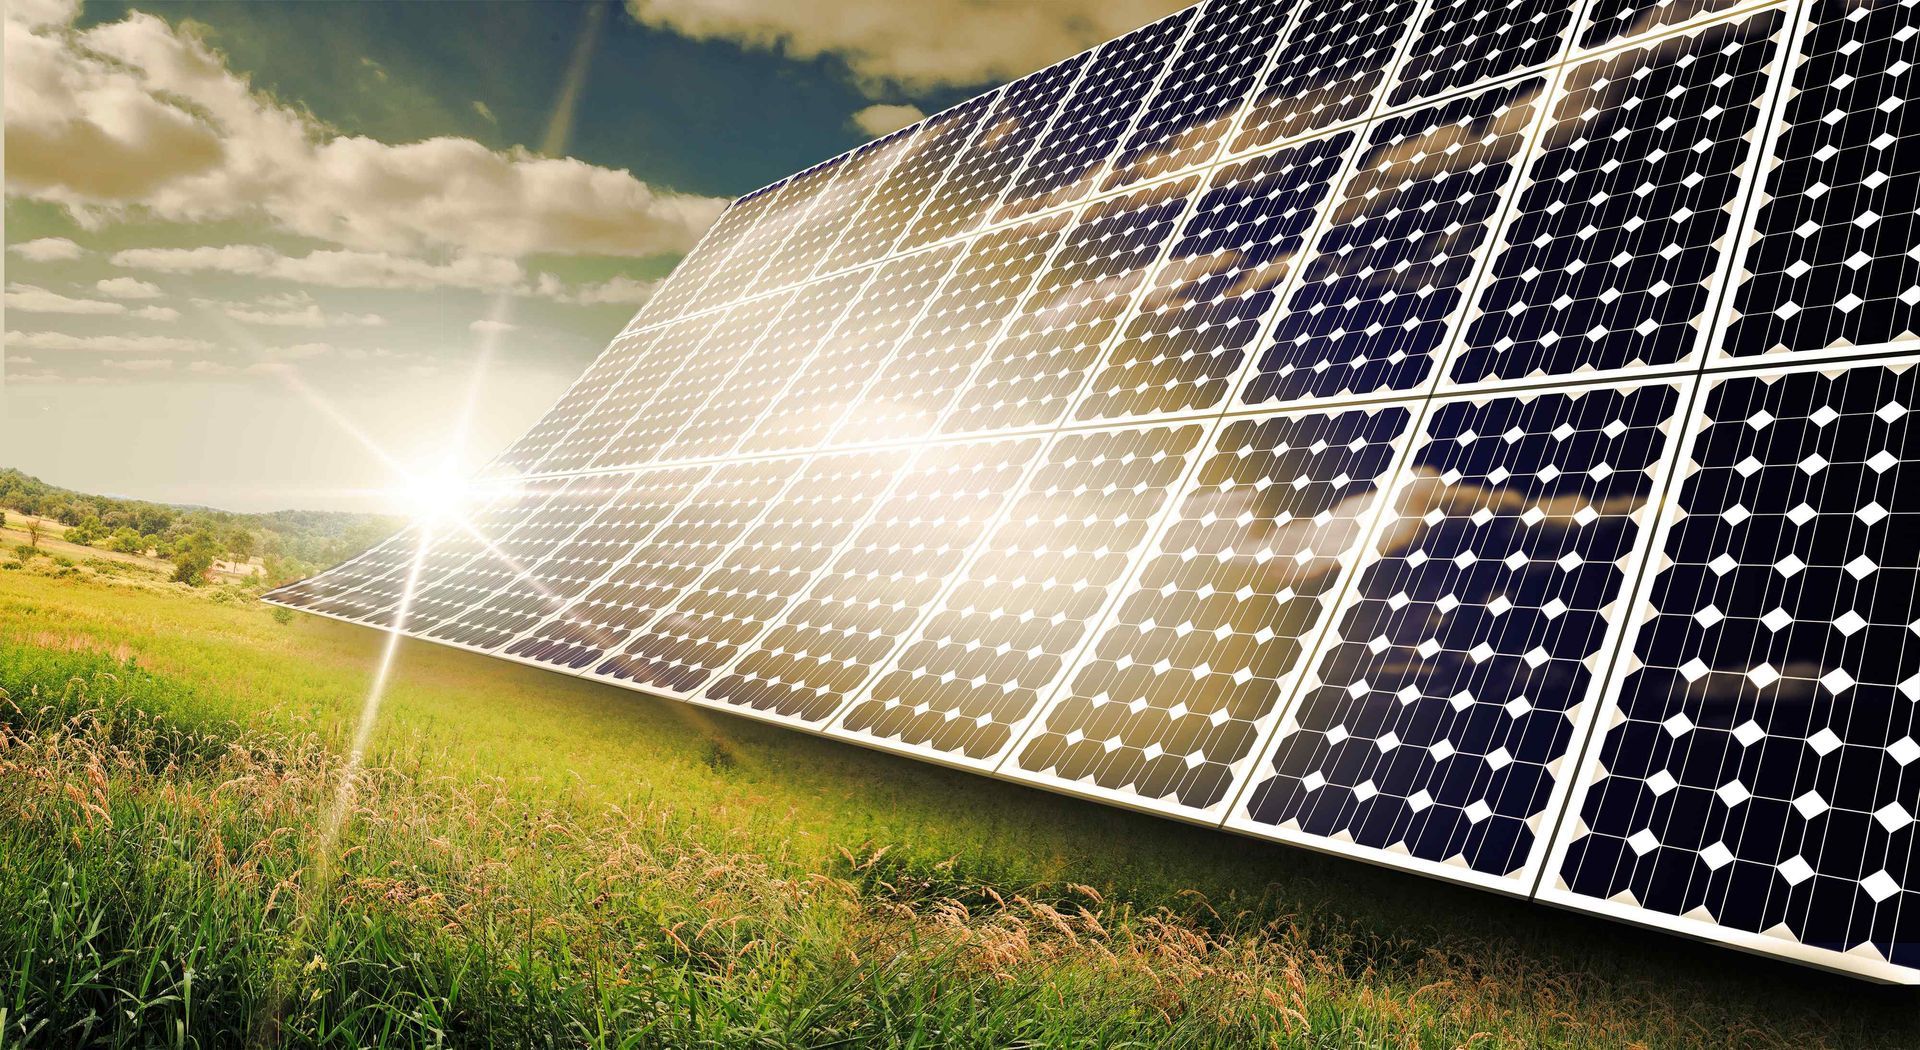 group of solar panels sitting at an angle in a grassy field to capture the shing sun